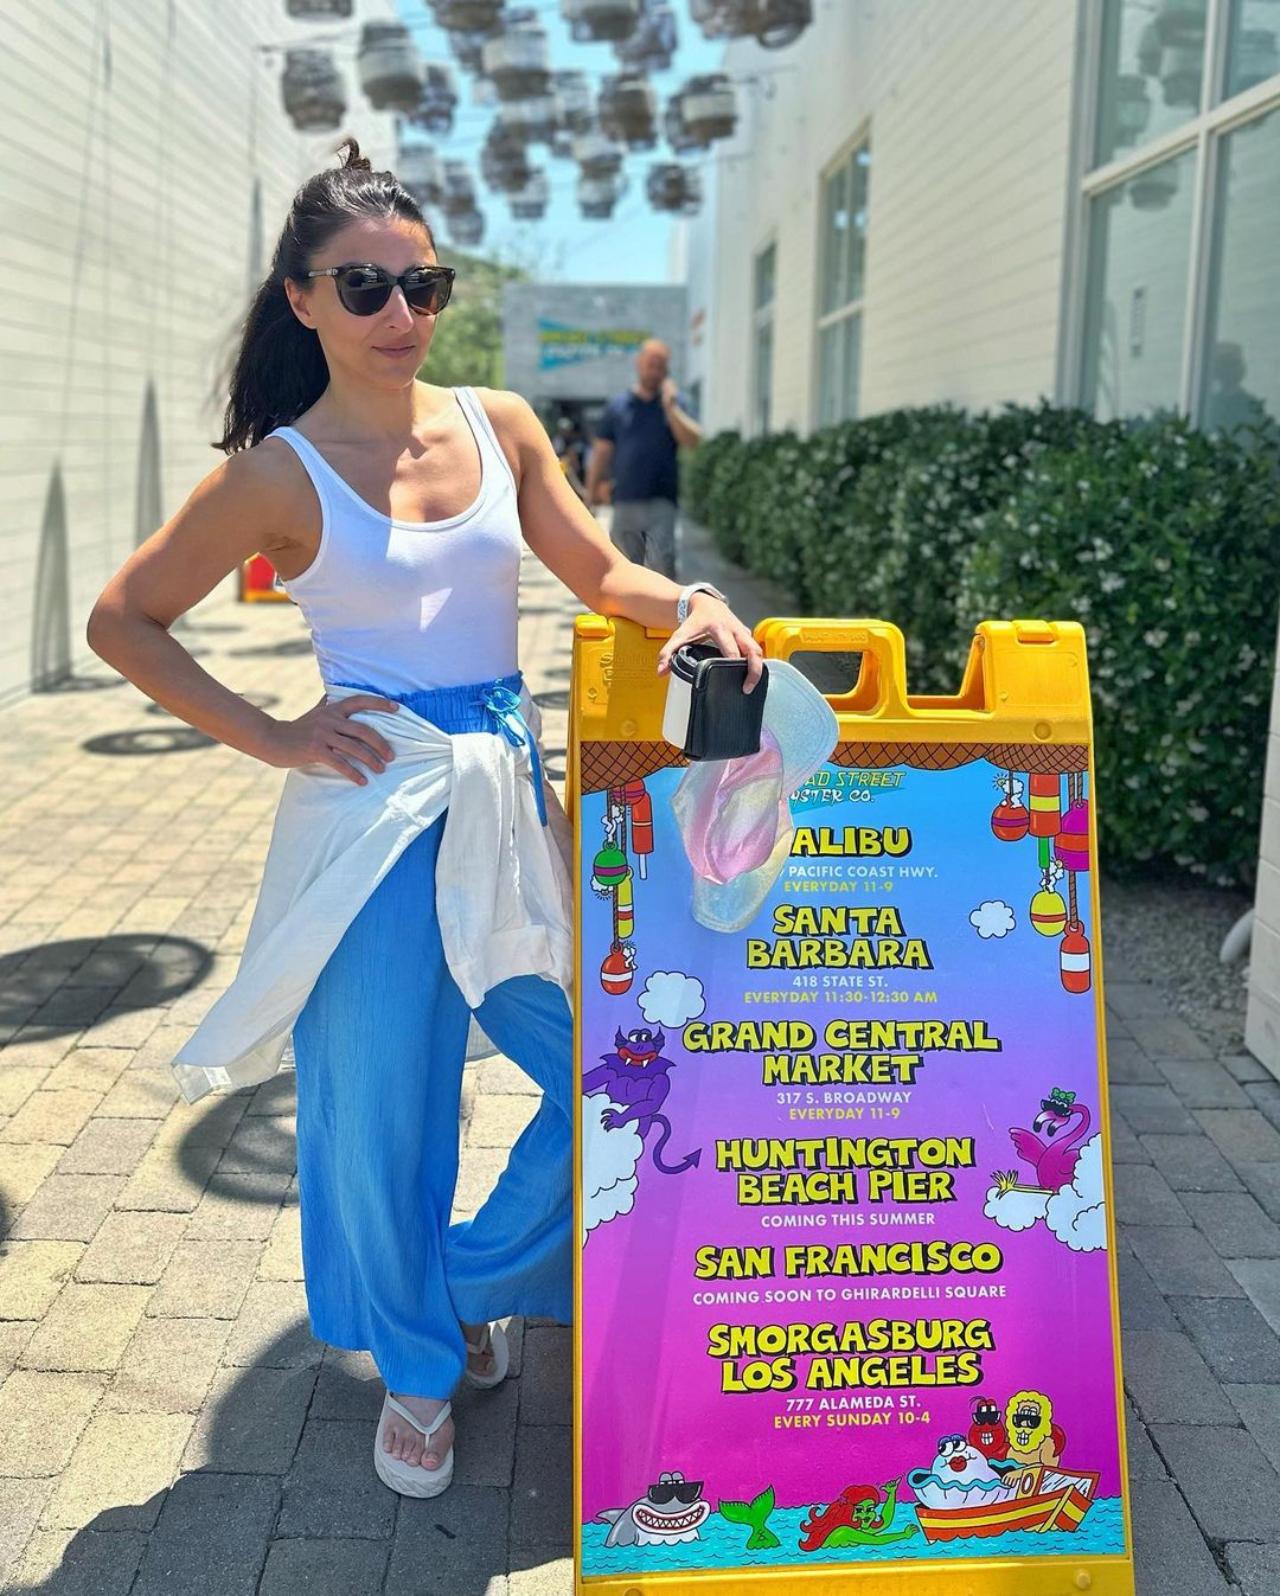 In a white tank top and sea-blue palazzo, Soha poses against what seems to be their itinerary in the USA